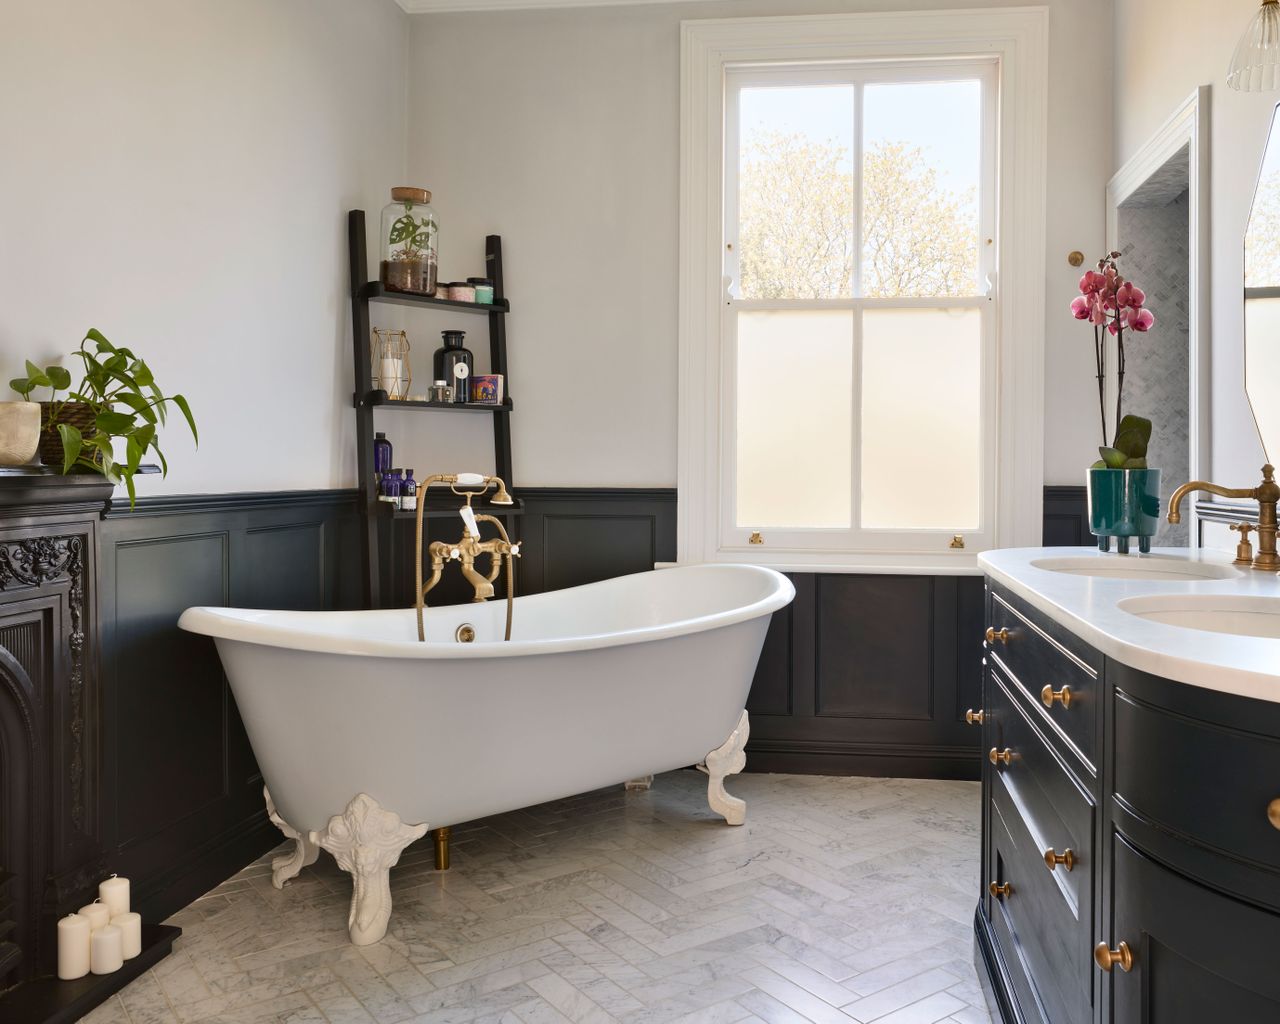 Outdated bathroom trends – 6 looks that designers avoid